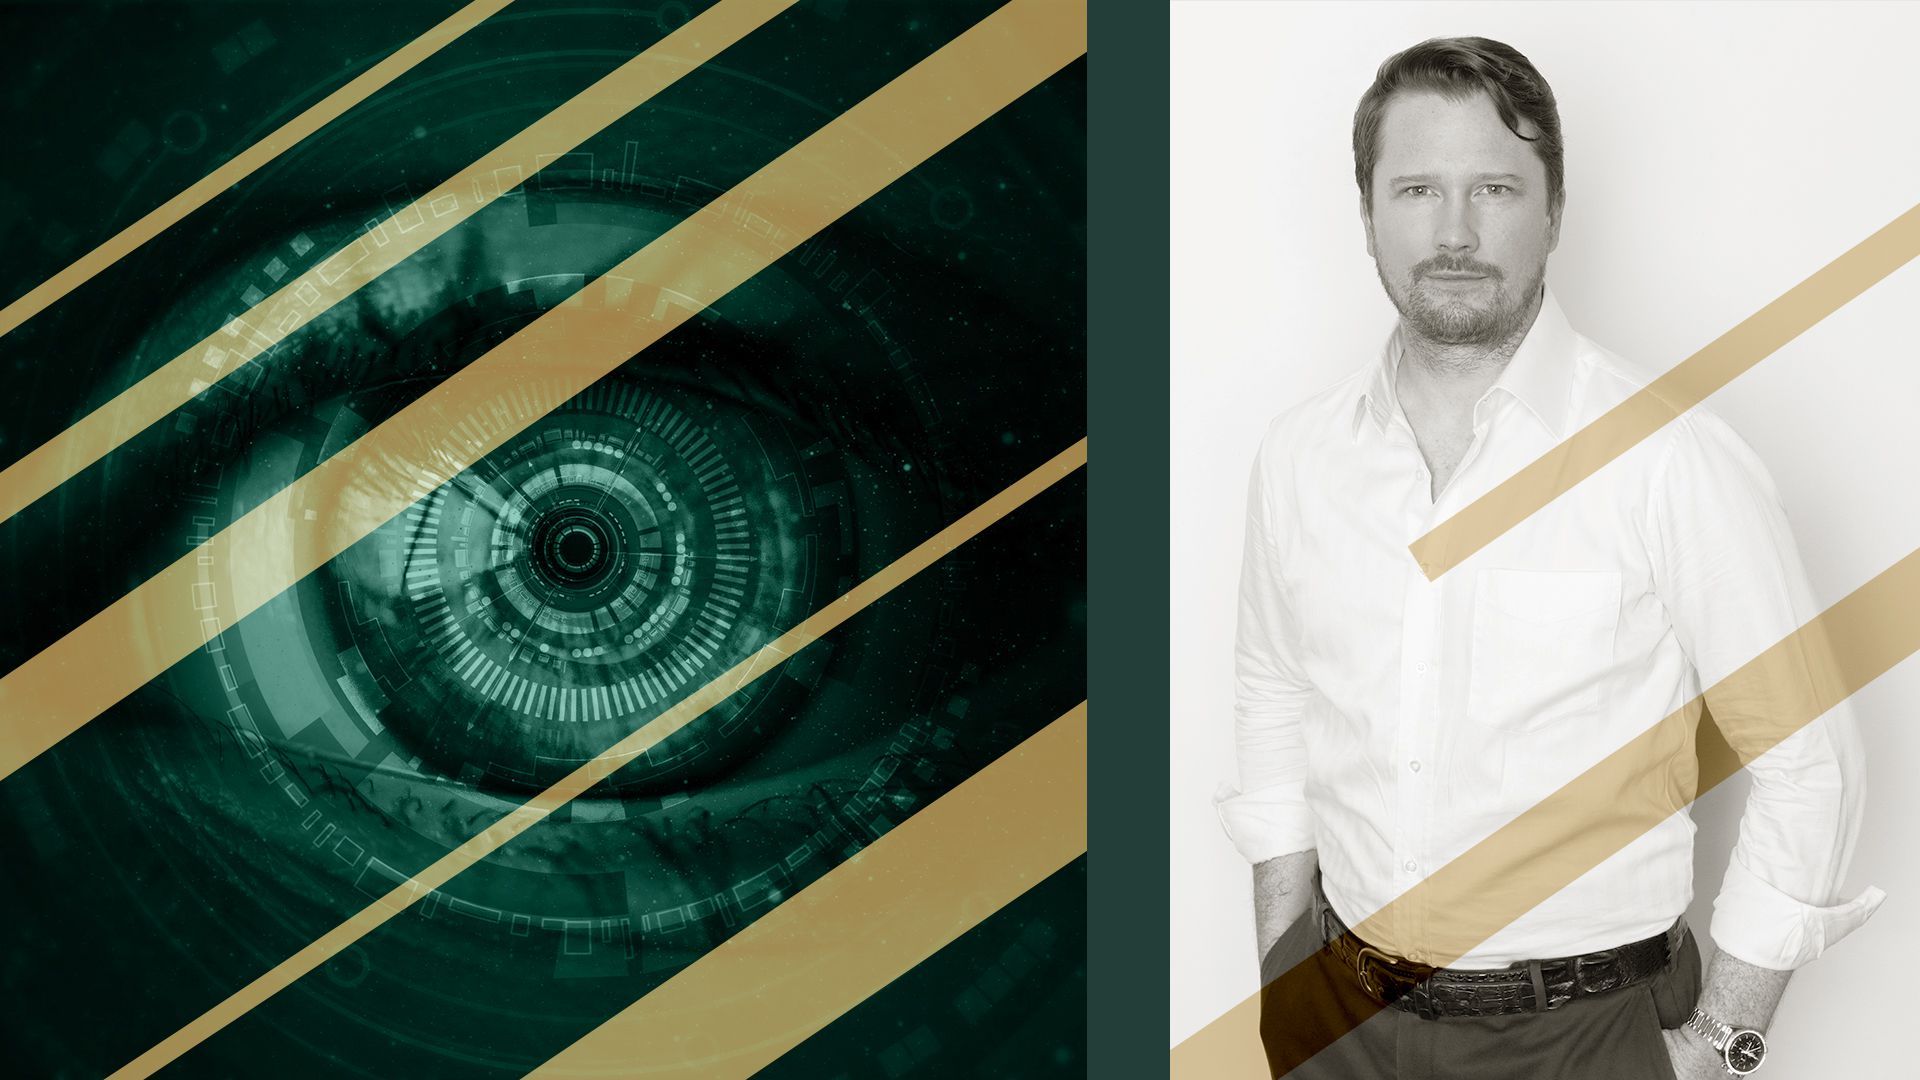 Photo illustration of  Metaphysic CEO and cofounder Tom Graham with a digital eye and lines in the background.